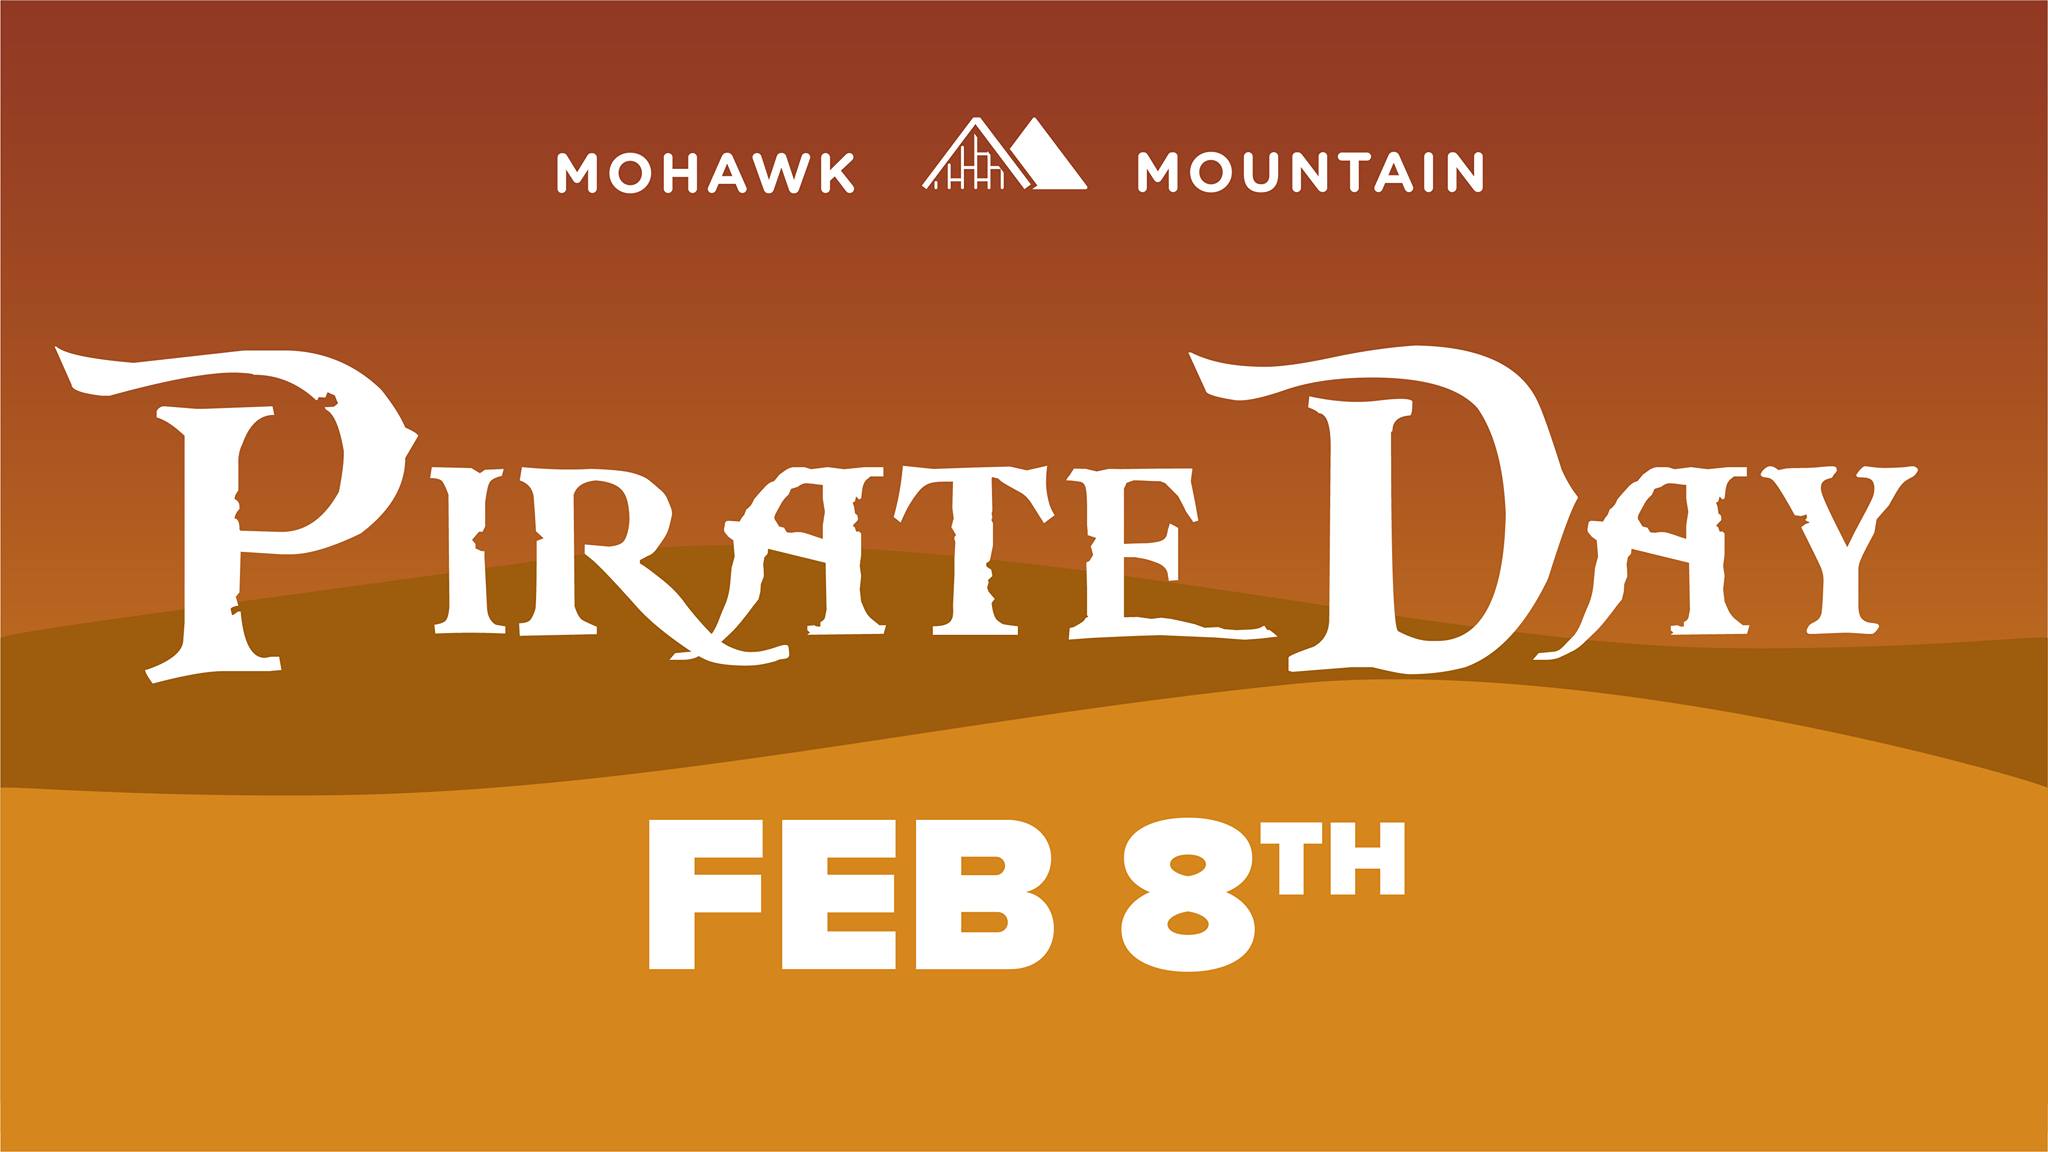 Pirate Day at Mohawk Mountain Connecticut